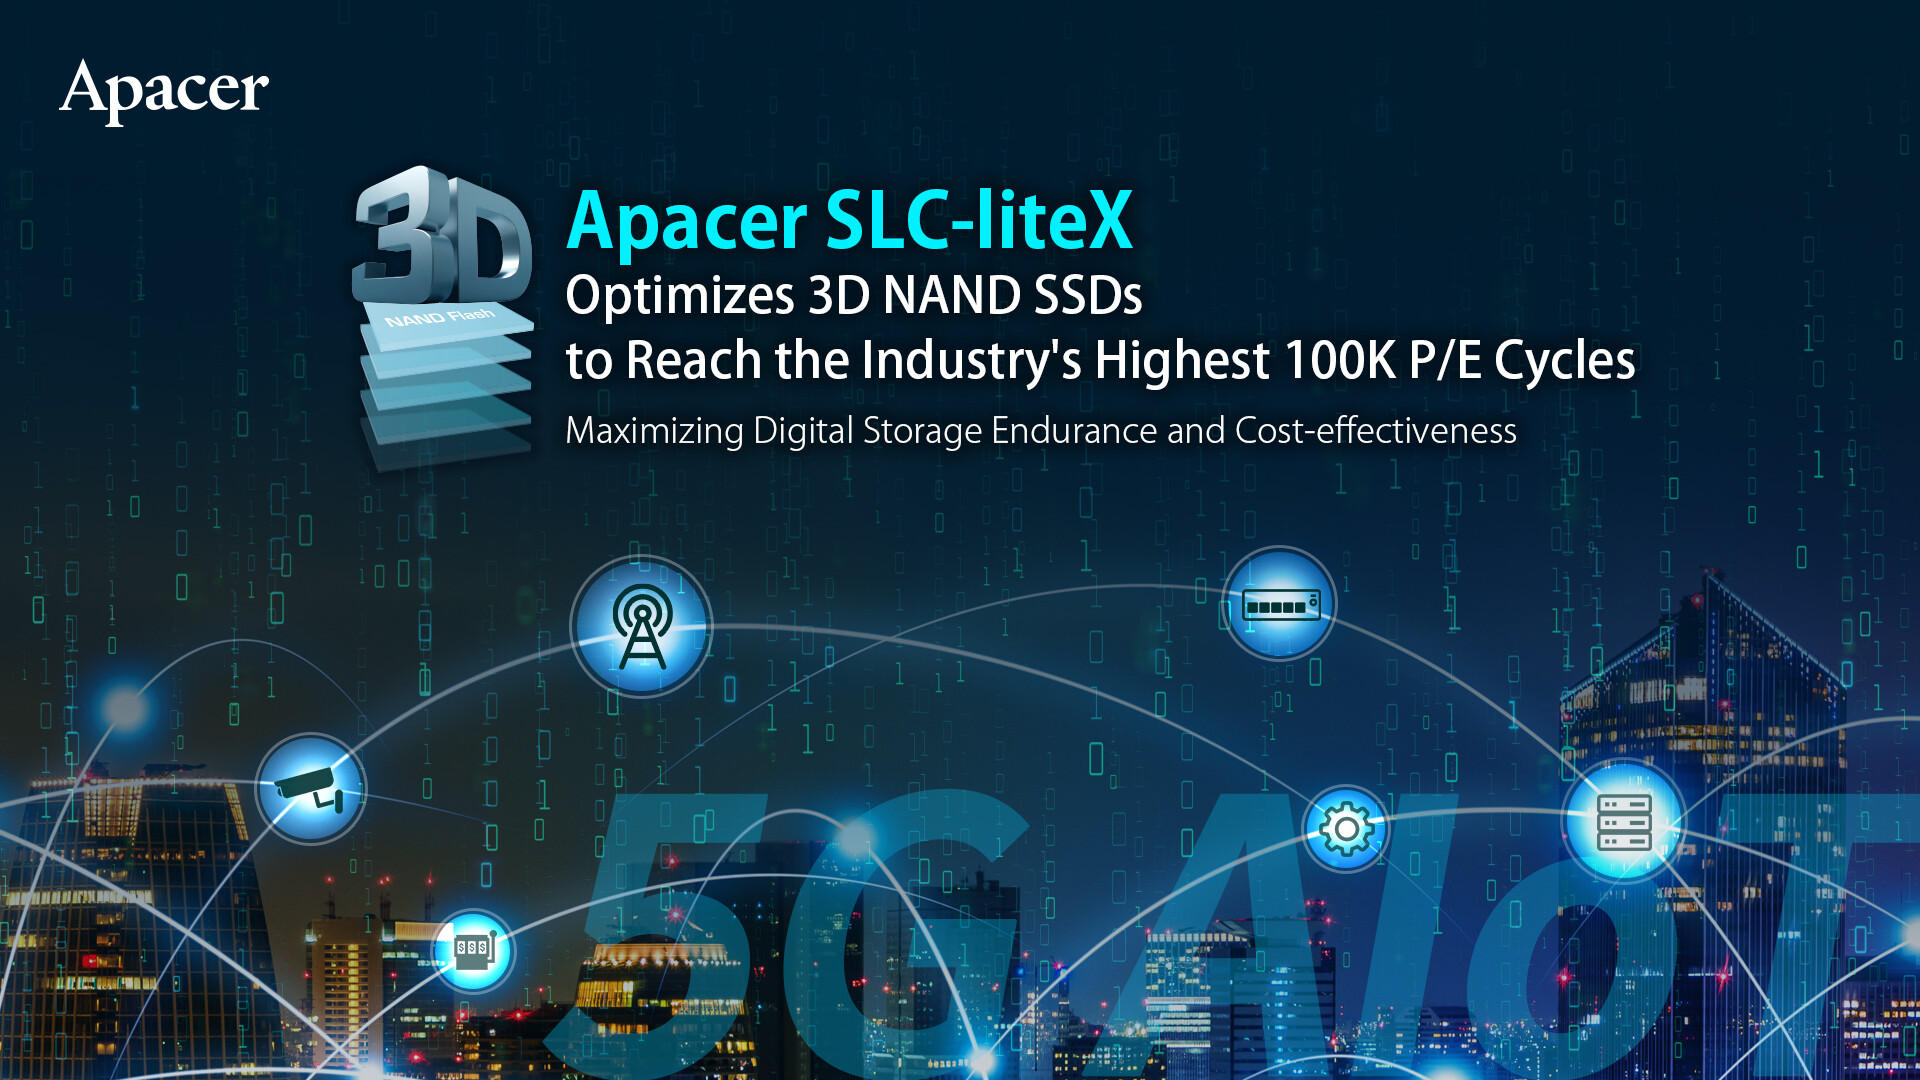 Apacer Also Announces SH250 and PH920 High-endurance SSD with SLC-LiteX Technology